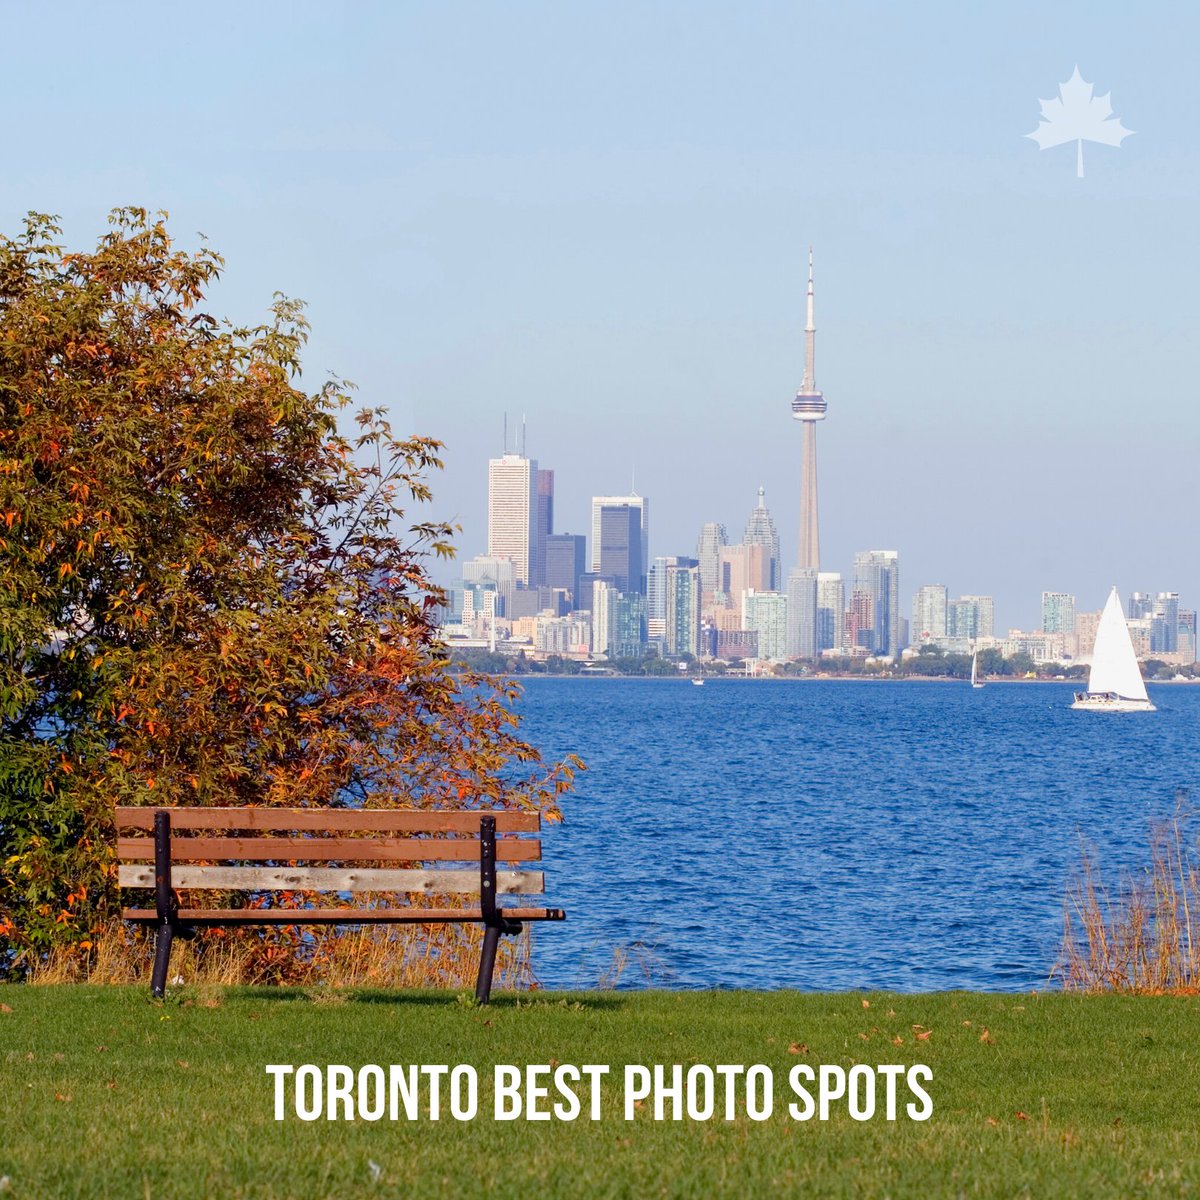 Mine’s from the top of CN Tower. What’s yours? Share it below, please!

#photography #shoot #torontopics #faves